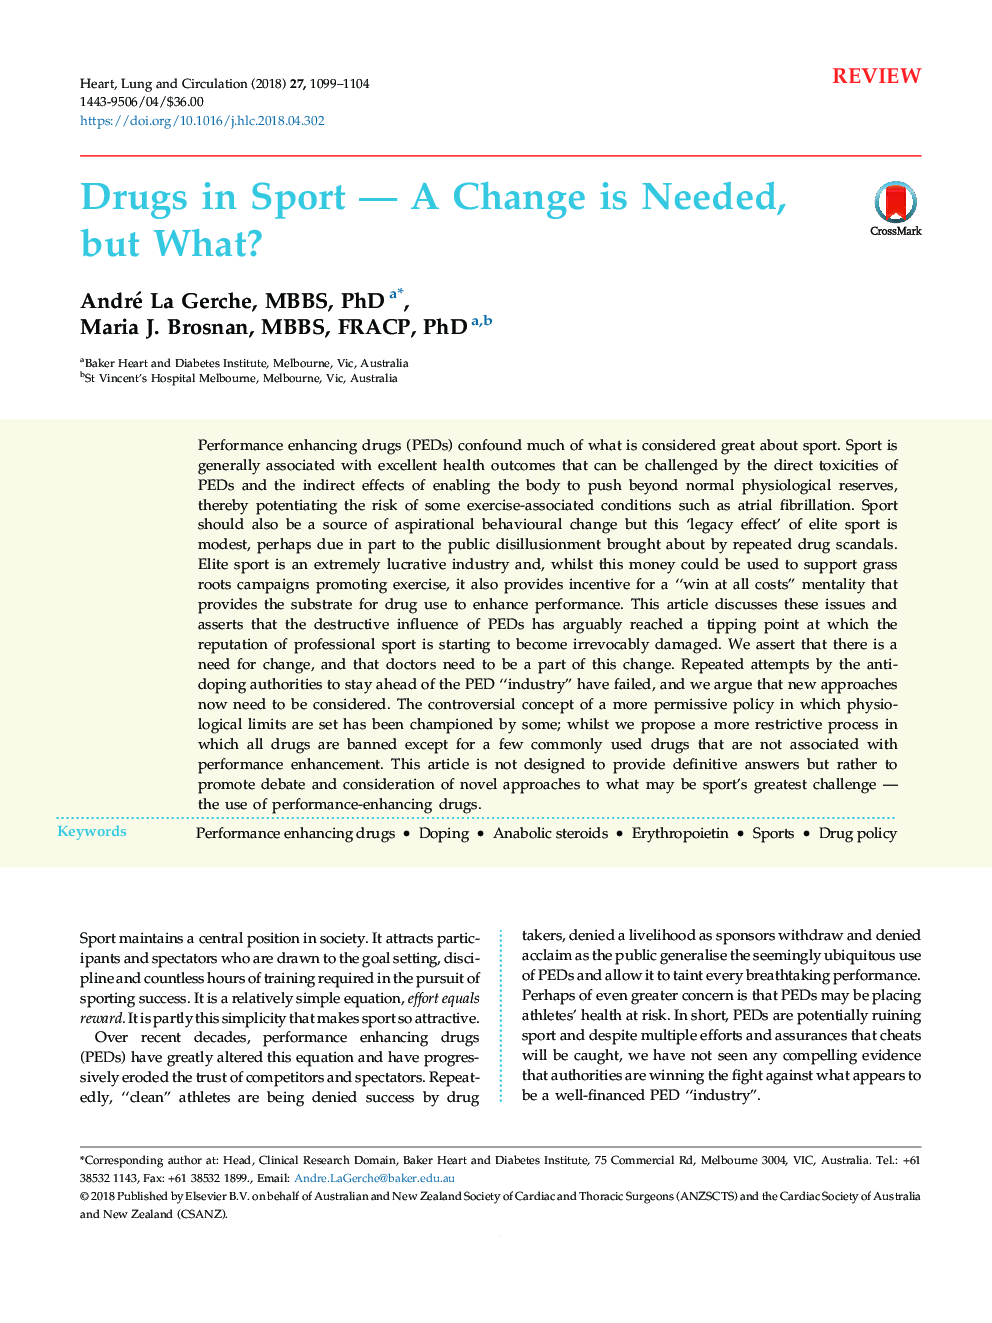 Drugs in Sport - A Change is Needed, but What?